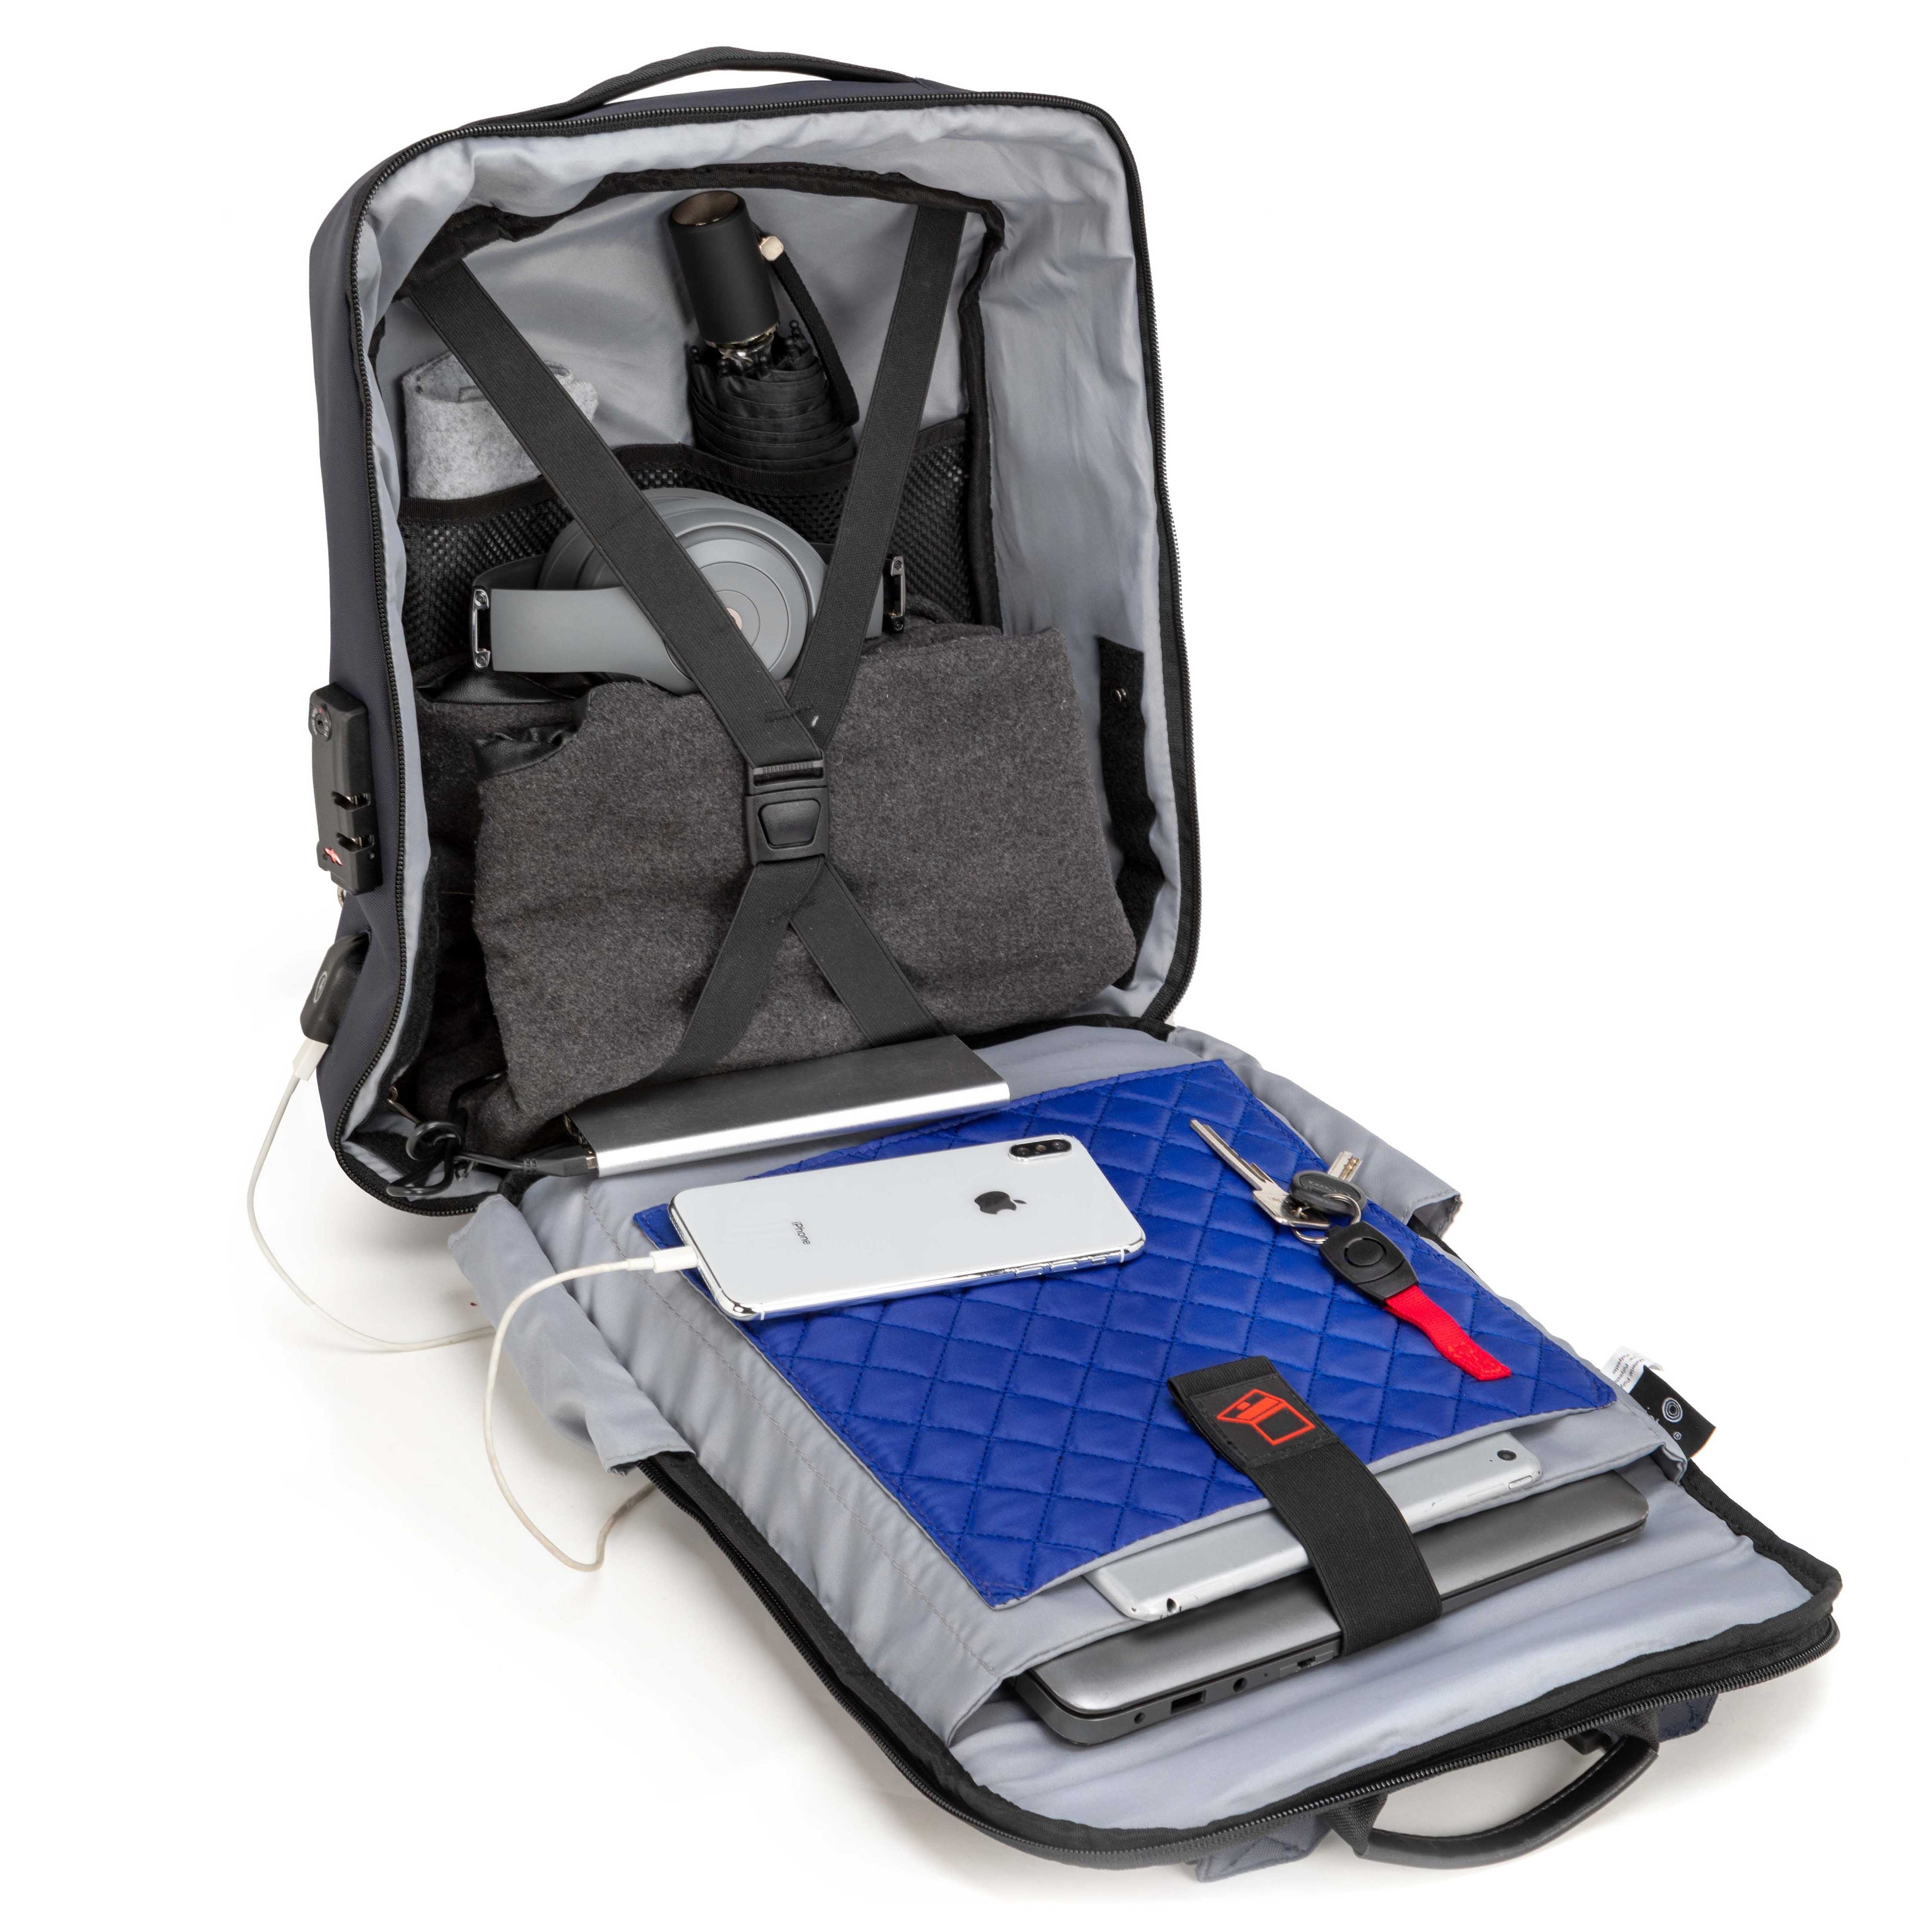 Squirrel Dictation Centimeter i-stay 15.6” Anti-theft Laptop & Tablet Overnight Backpack With RFID Pocket  - Navy - Backpack - Falcon